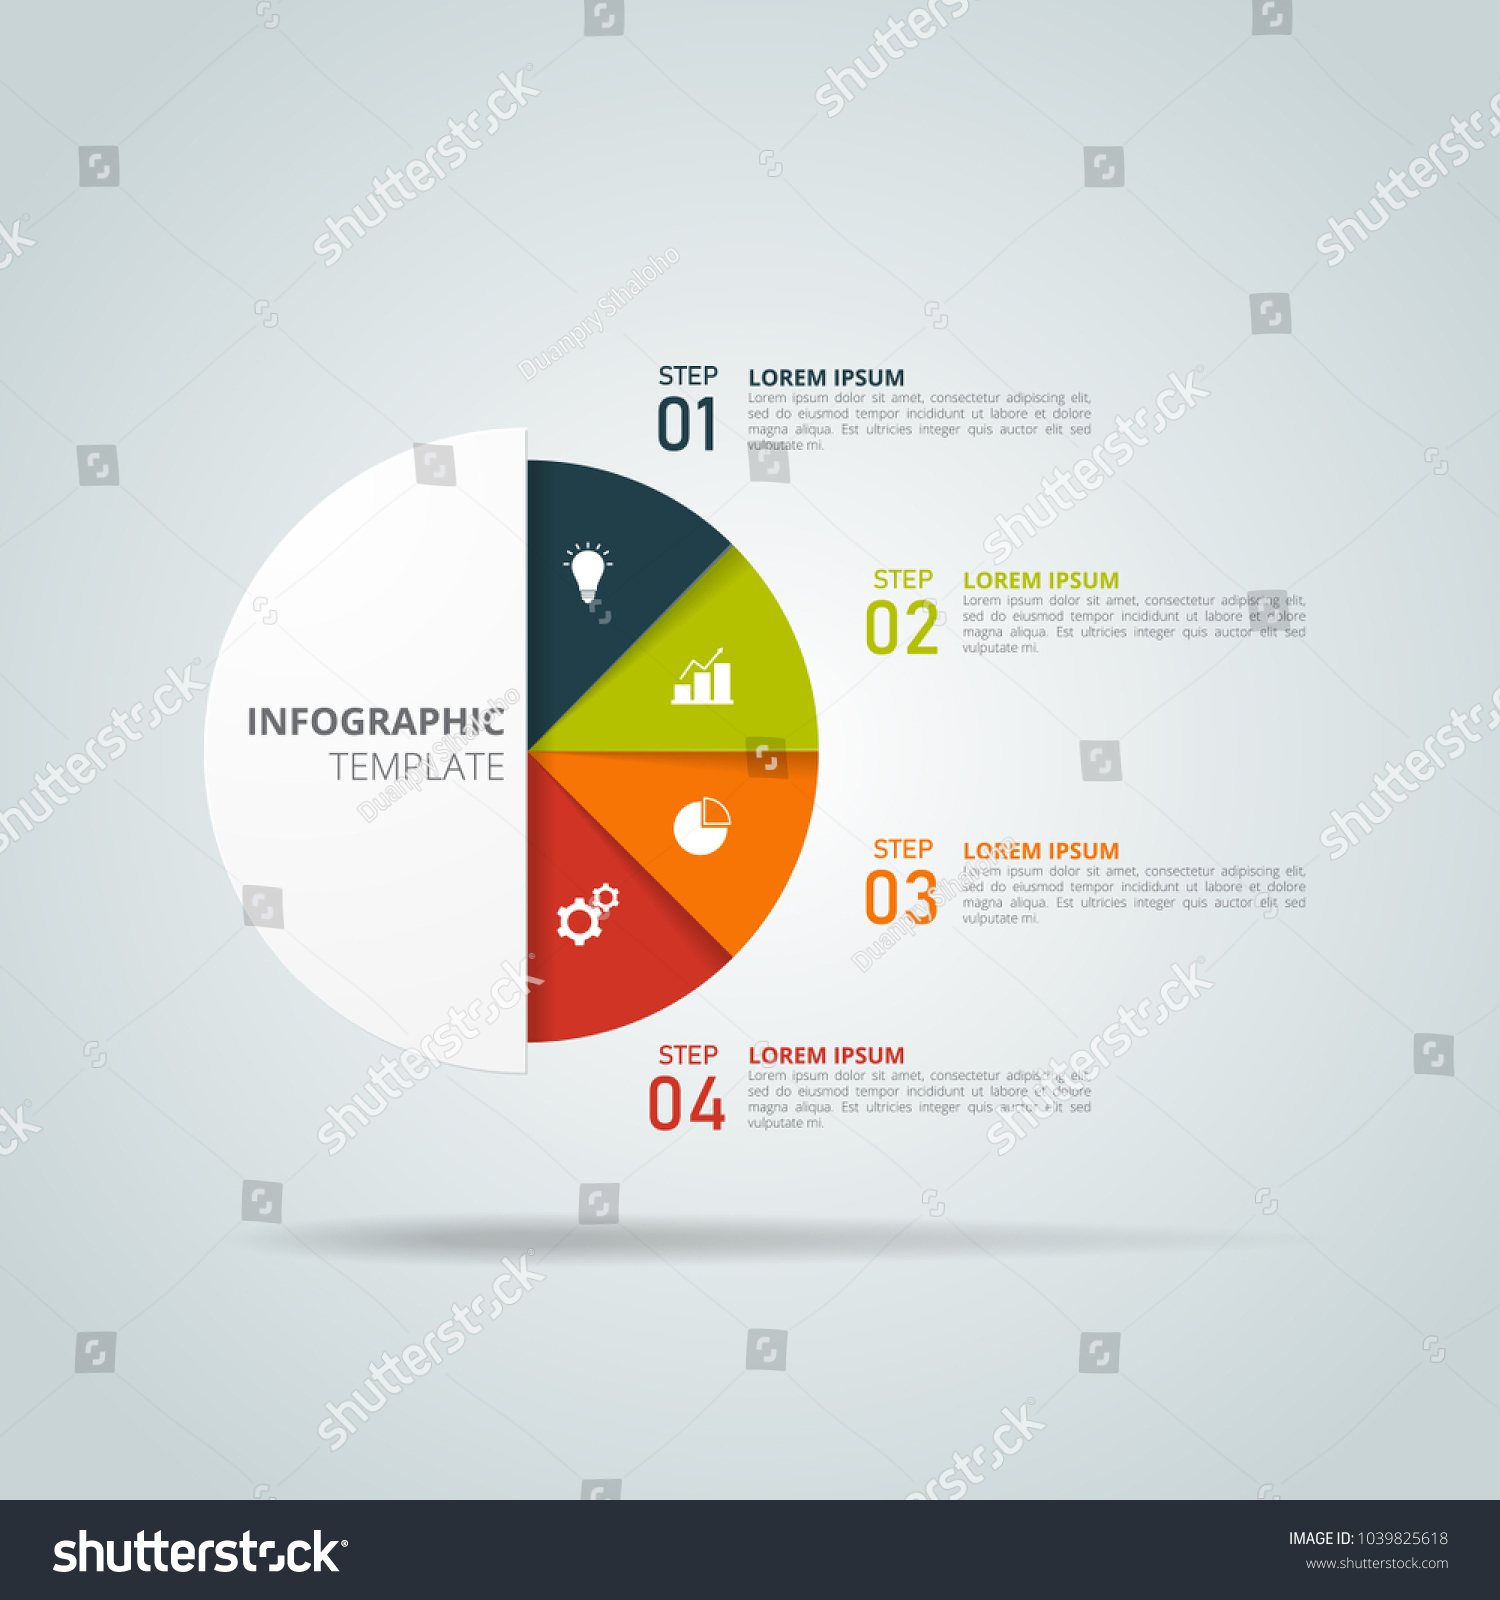 Infographics Template Business Education Web Design Stock Vector ...